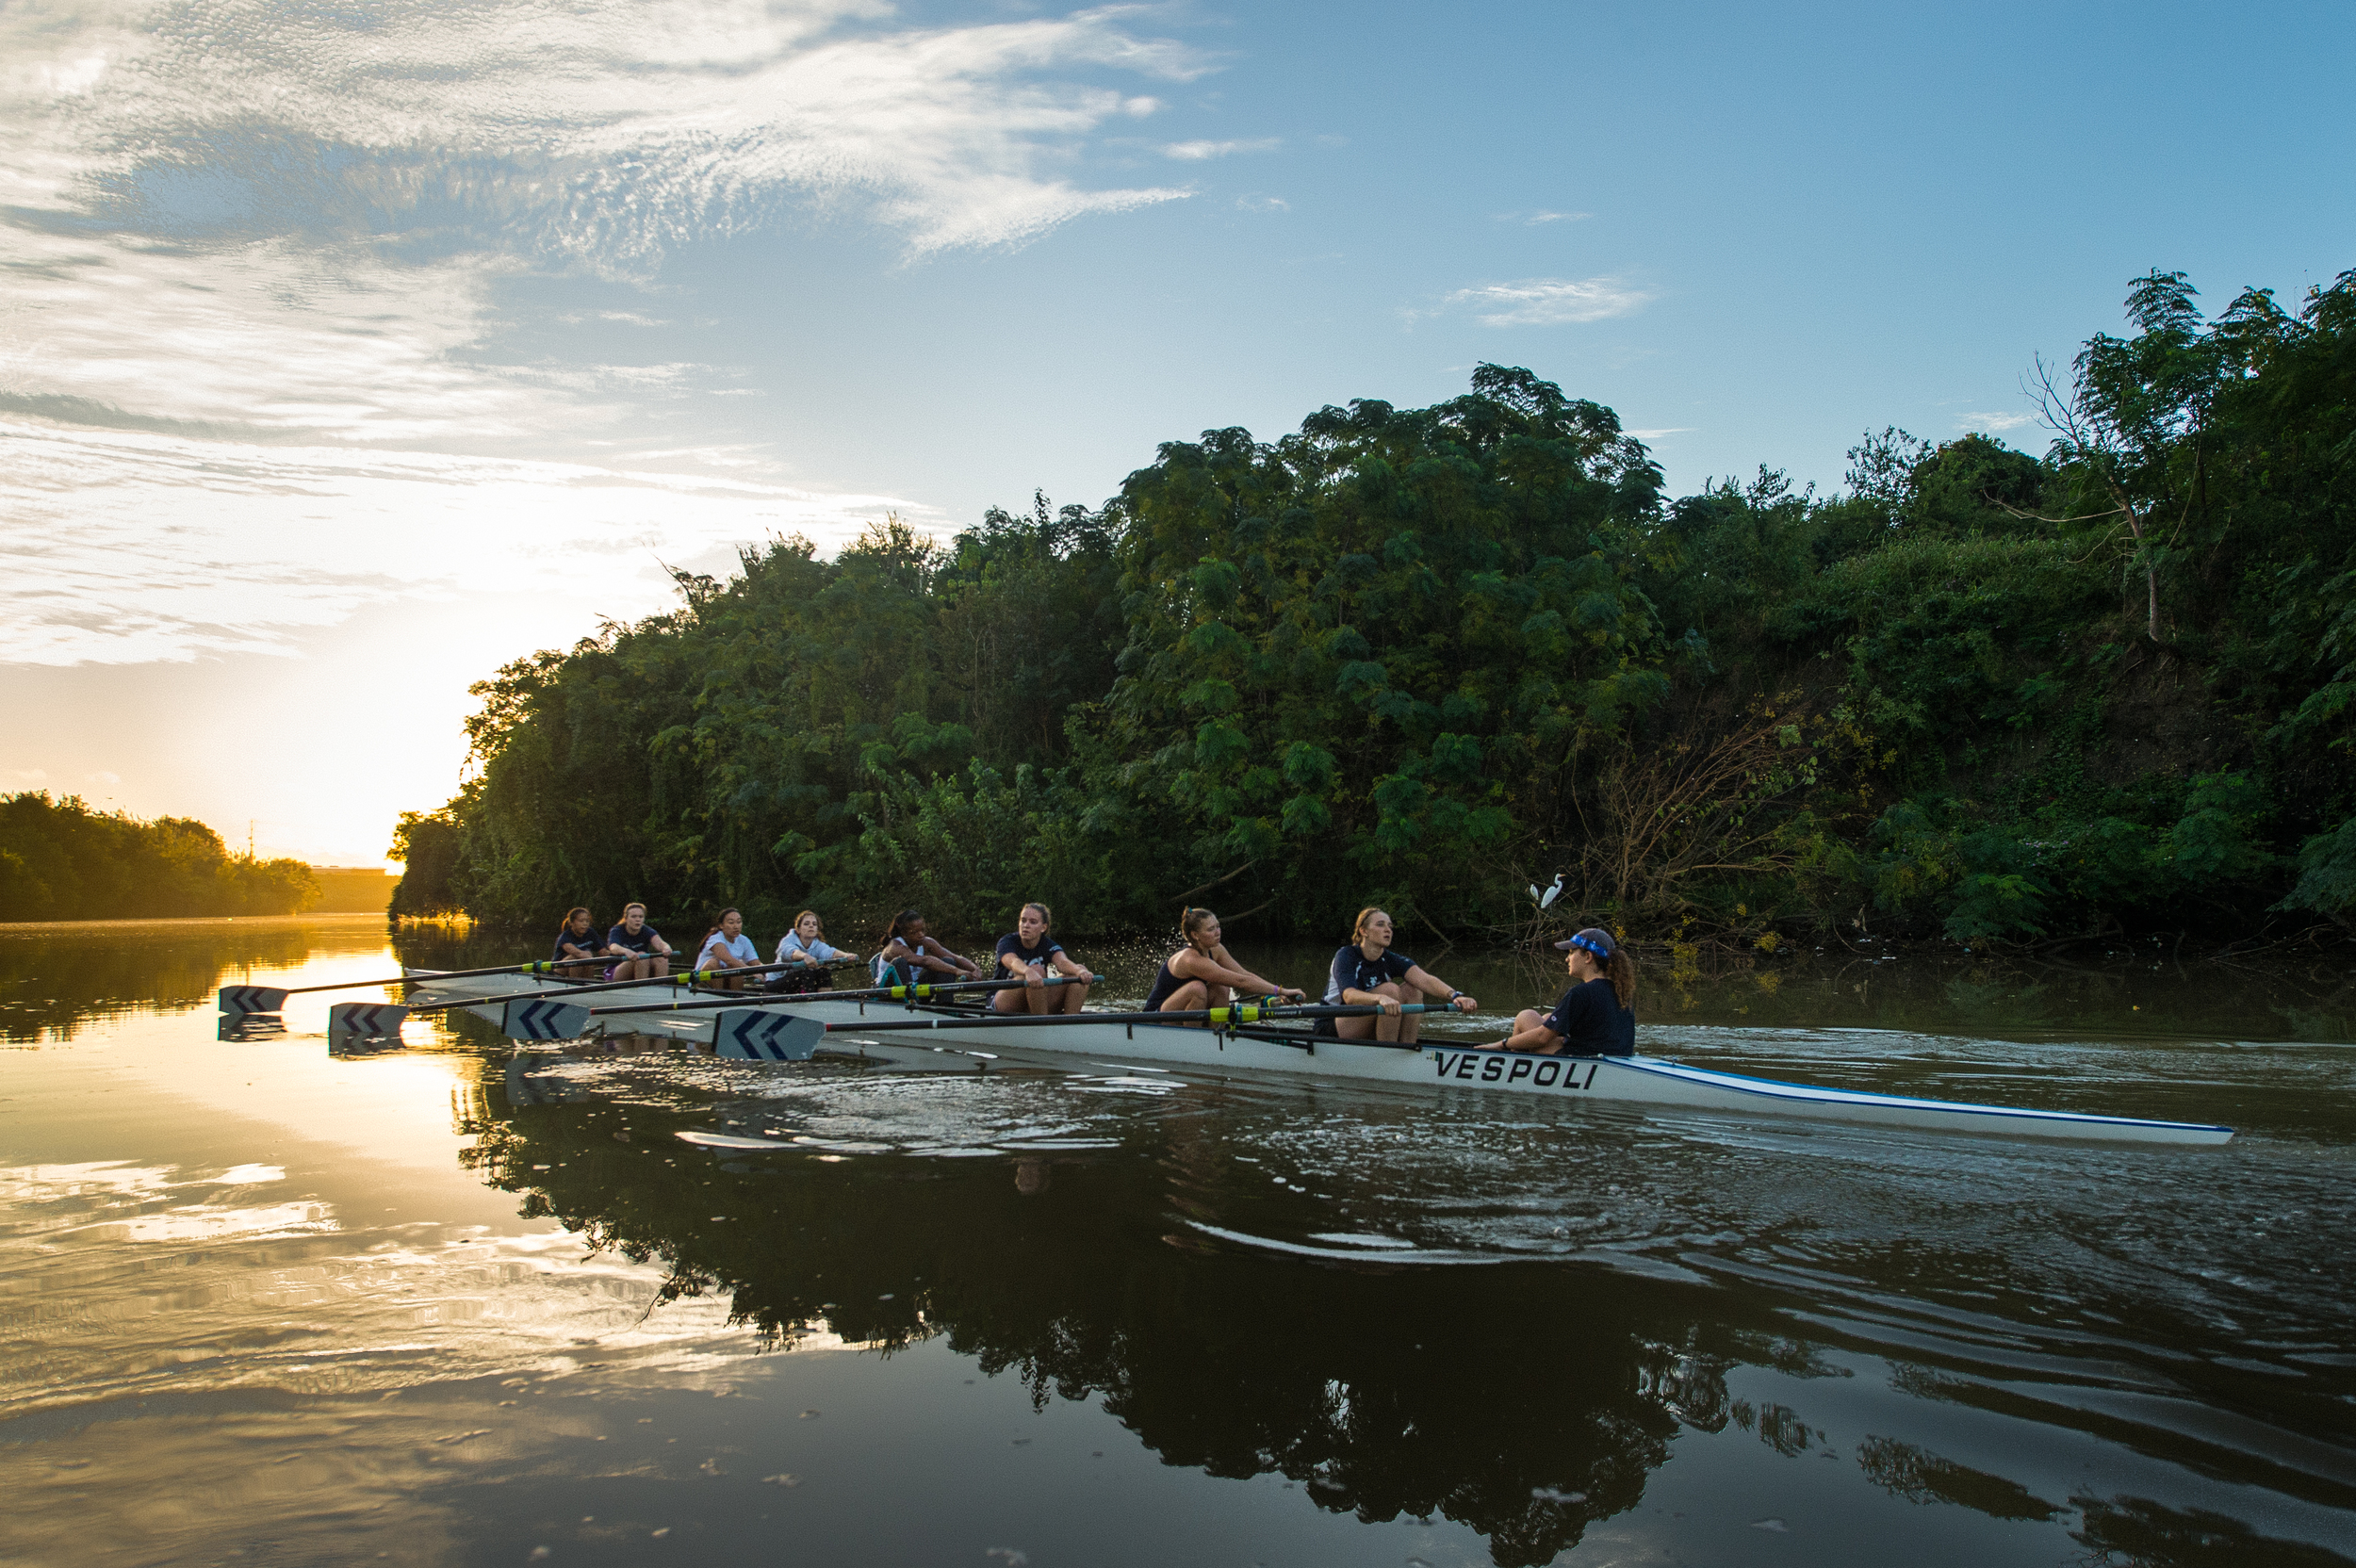   Home of Rice University's Rowing Team   define your college experience   join us  